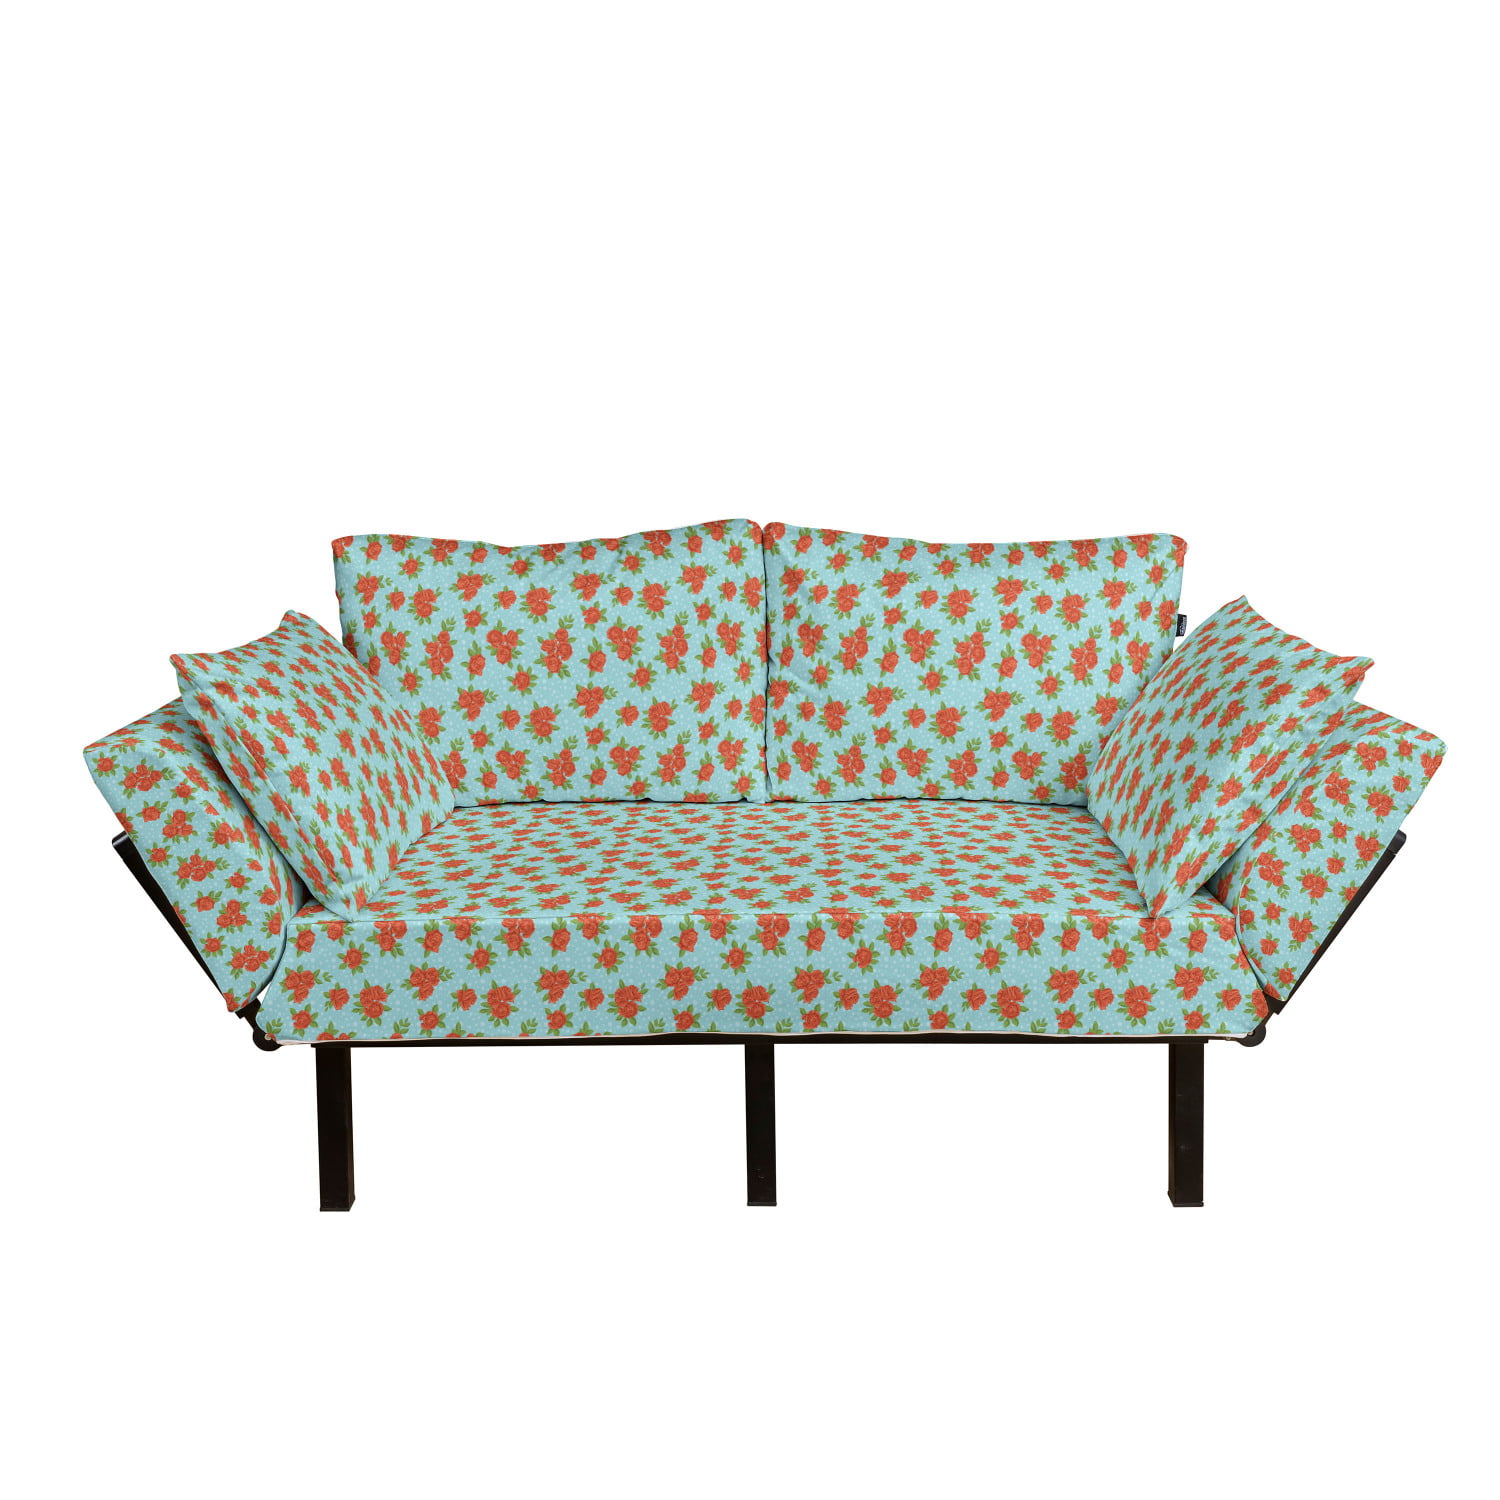 Loveseat Leaves and Flowers on an Ornate Background Ivory Coral Salmon Daybed with Metal Frame Upholstered Sofa for Living Dorm Ambesonne Floral Futon Couch